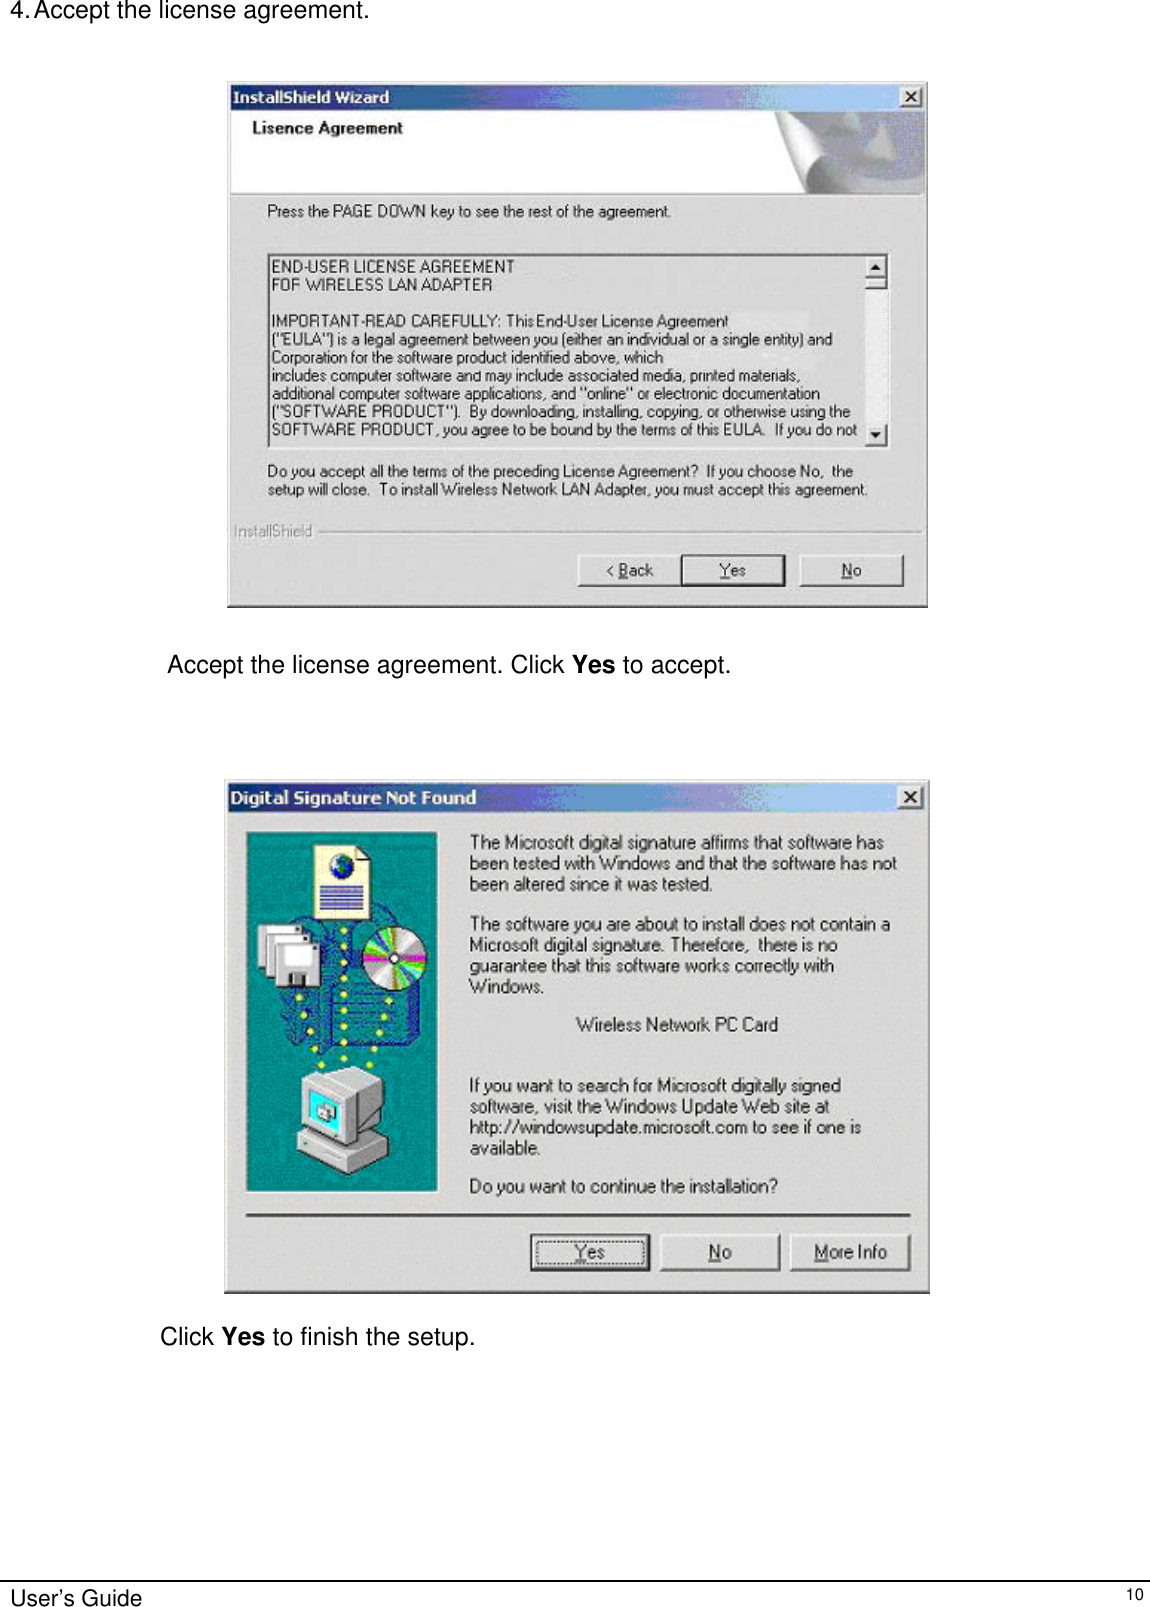                                                                                                                                                                              User’s Guide   104. Accept the license agreement.     Accept the license agreement. Click Yes to accept.                          Click Yes to finish the setup.  